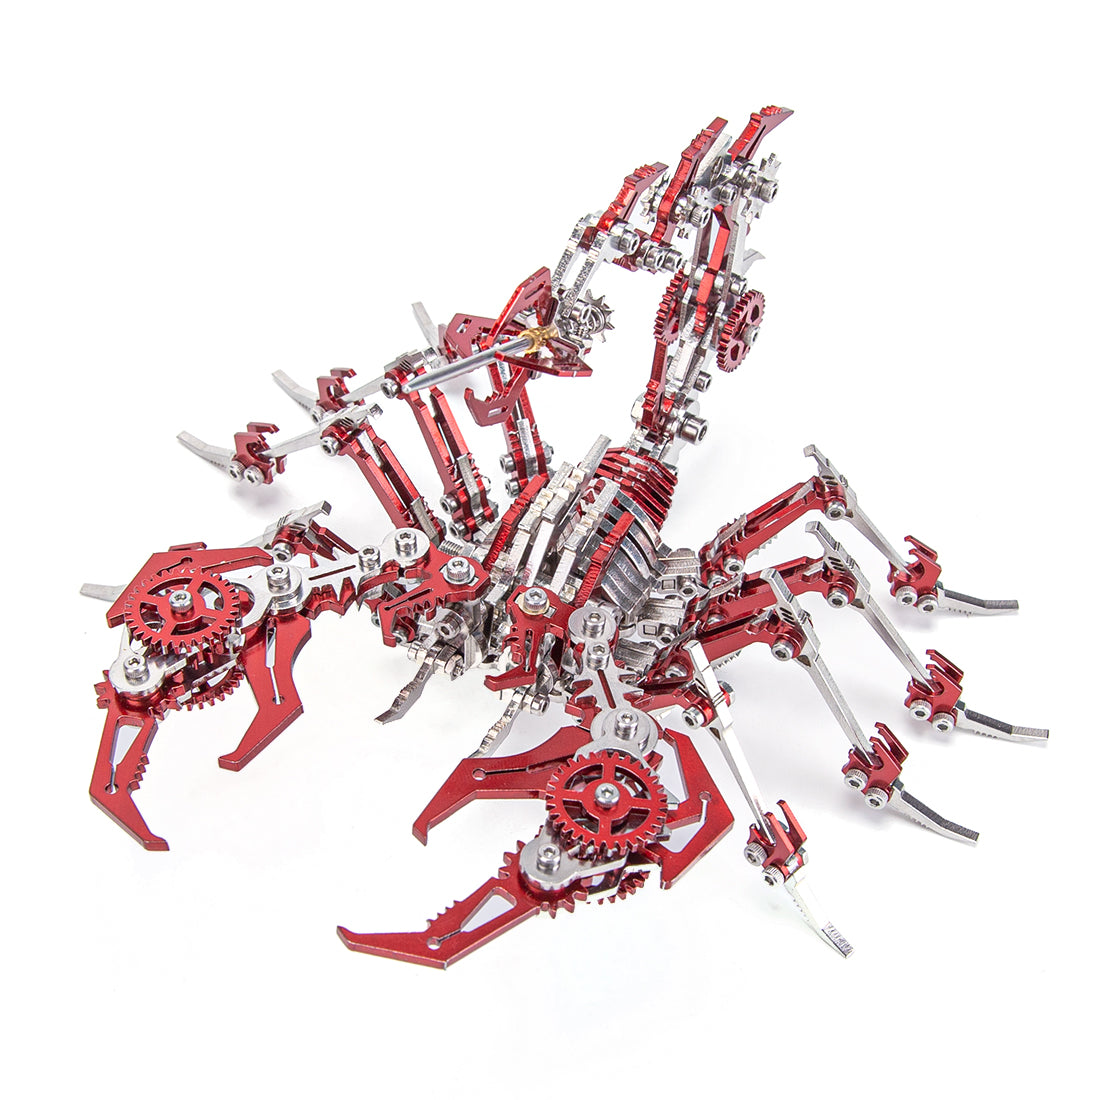 3D Metal Scorpion Puzzles for Adults: 3-D Puzzles Metal Model Kits to Build  DIY Assembly Mechanical Puzzle Building Block Toys with Tool Brain Teaser  Craft for Home Decor (Metal Scorpion-Blue) - Yahoo